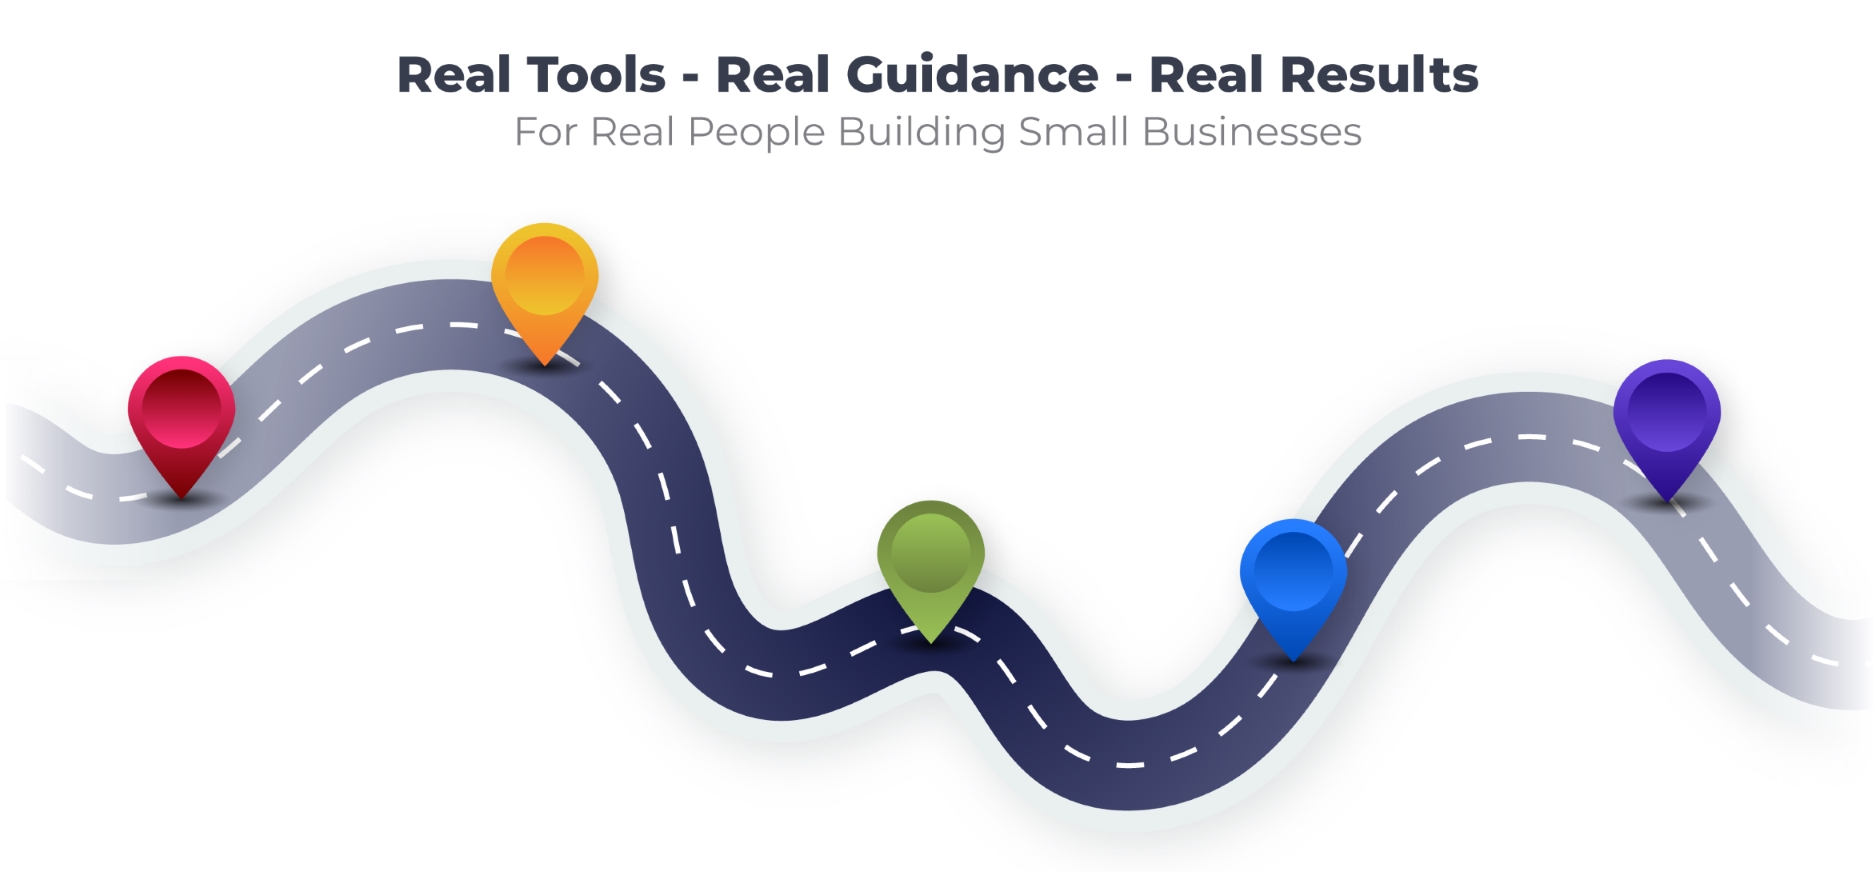 Real Tools, Real Guidance, Real Results for Real People Building Businesses